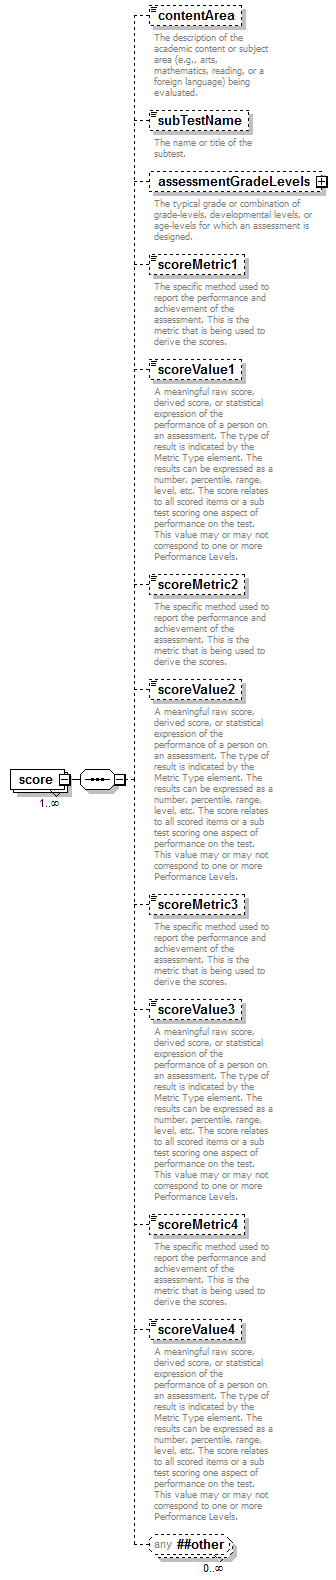 ReportObjects_diagrams/ReportObjects_p51.png